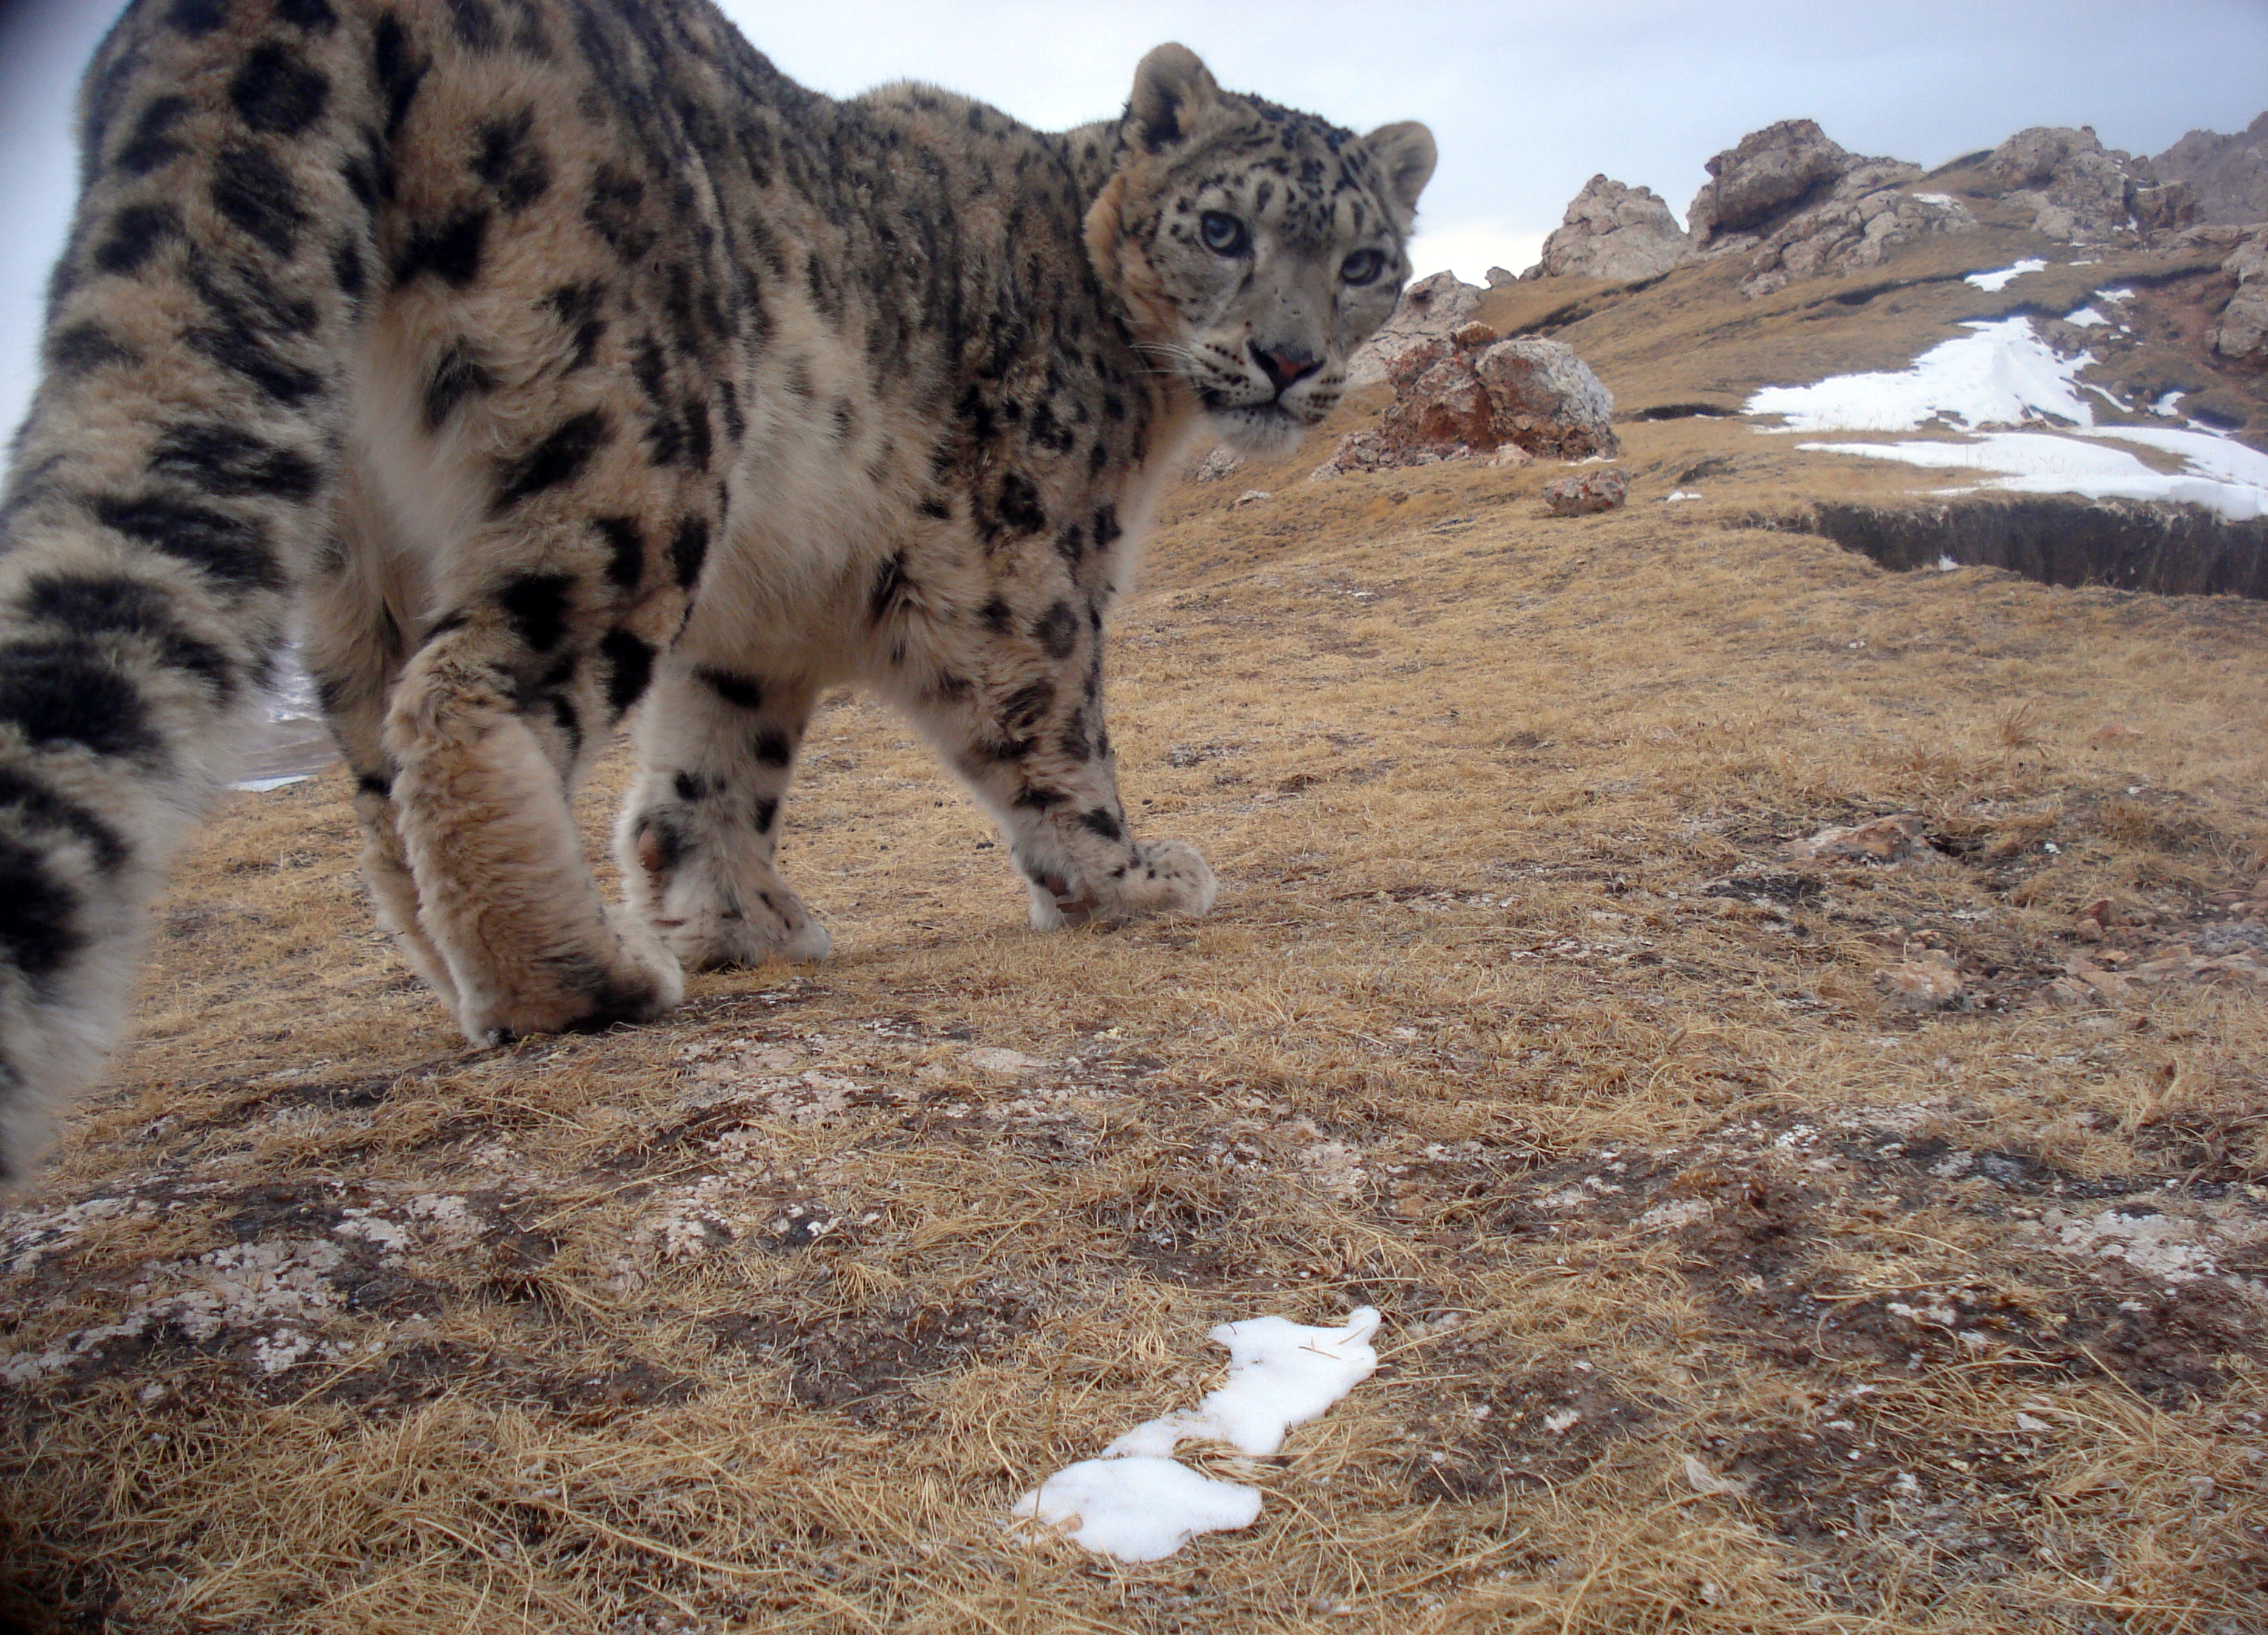 "Snow Leopard looking back at camera"